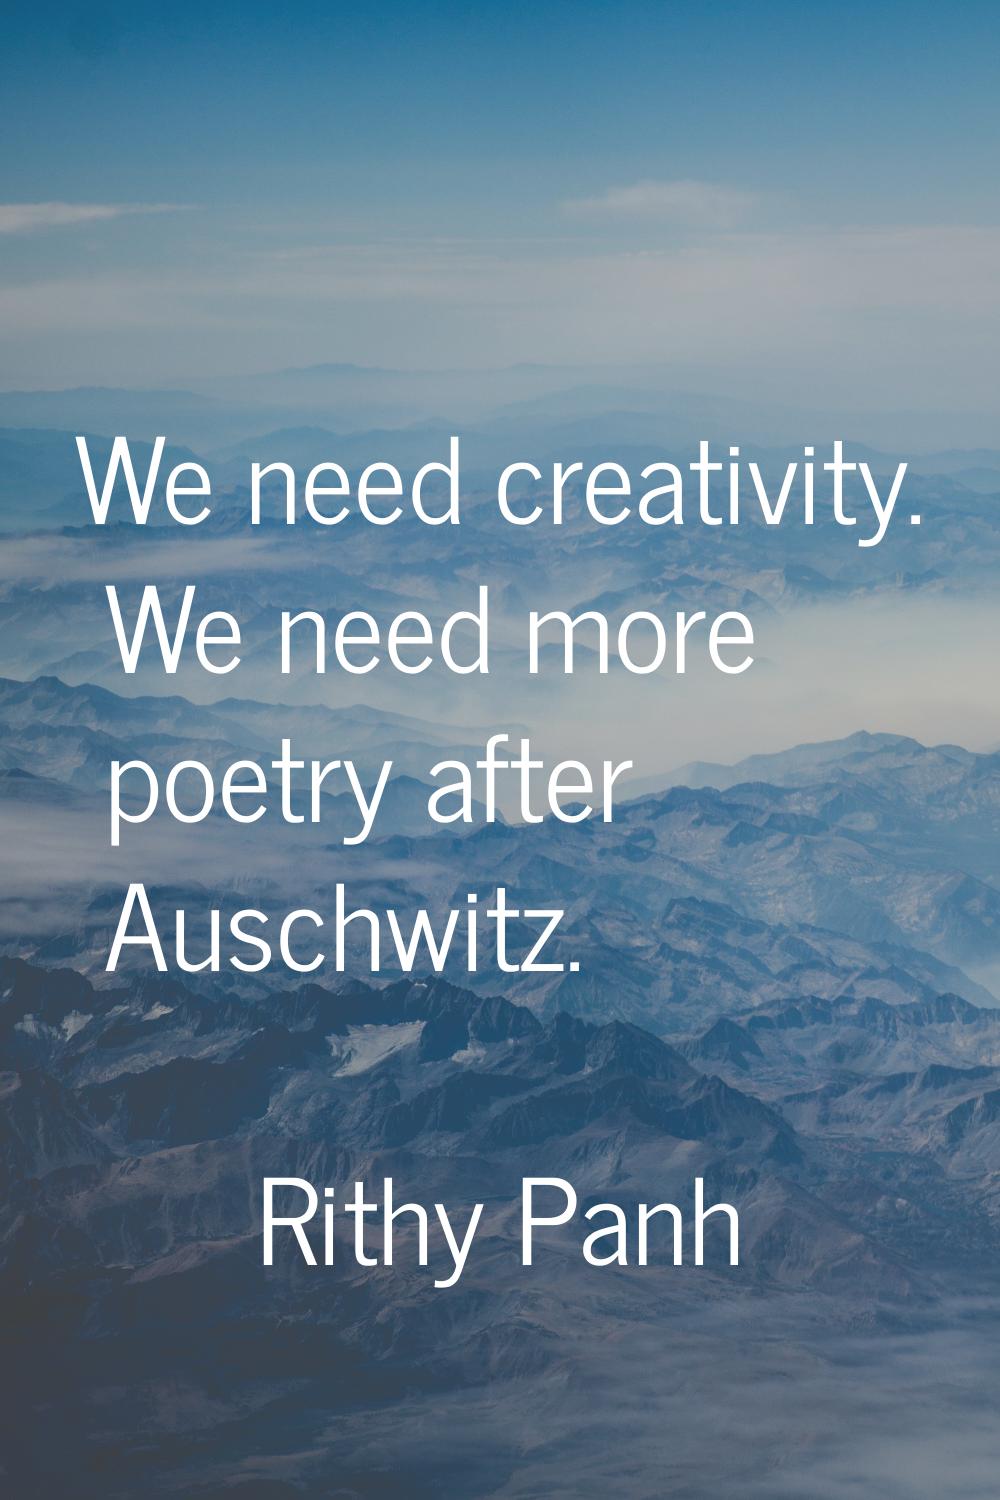 We need creativity. We need more poetry after Auschwitz.